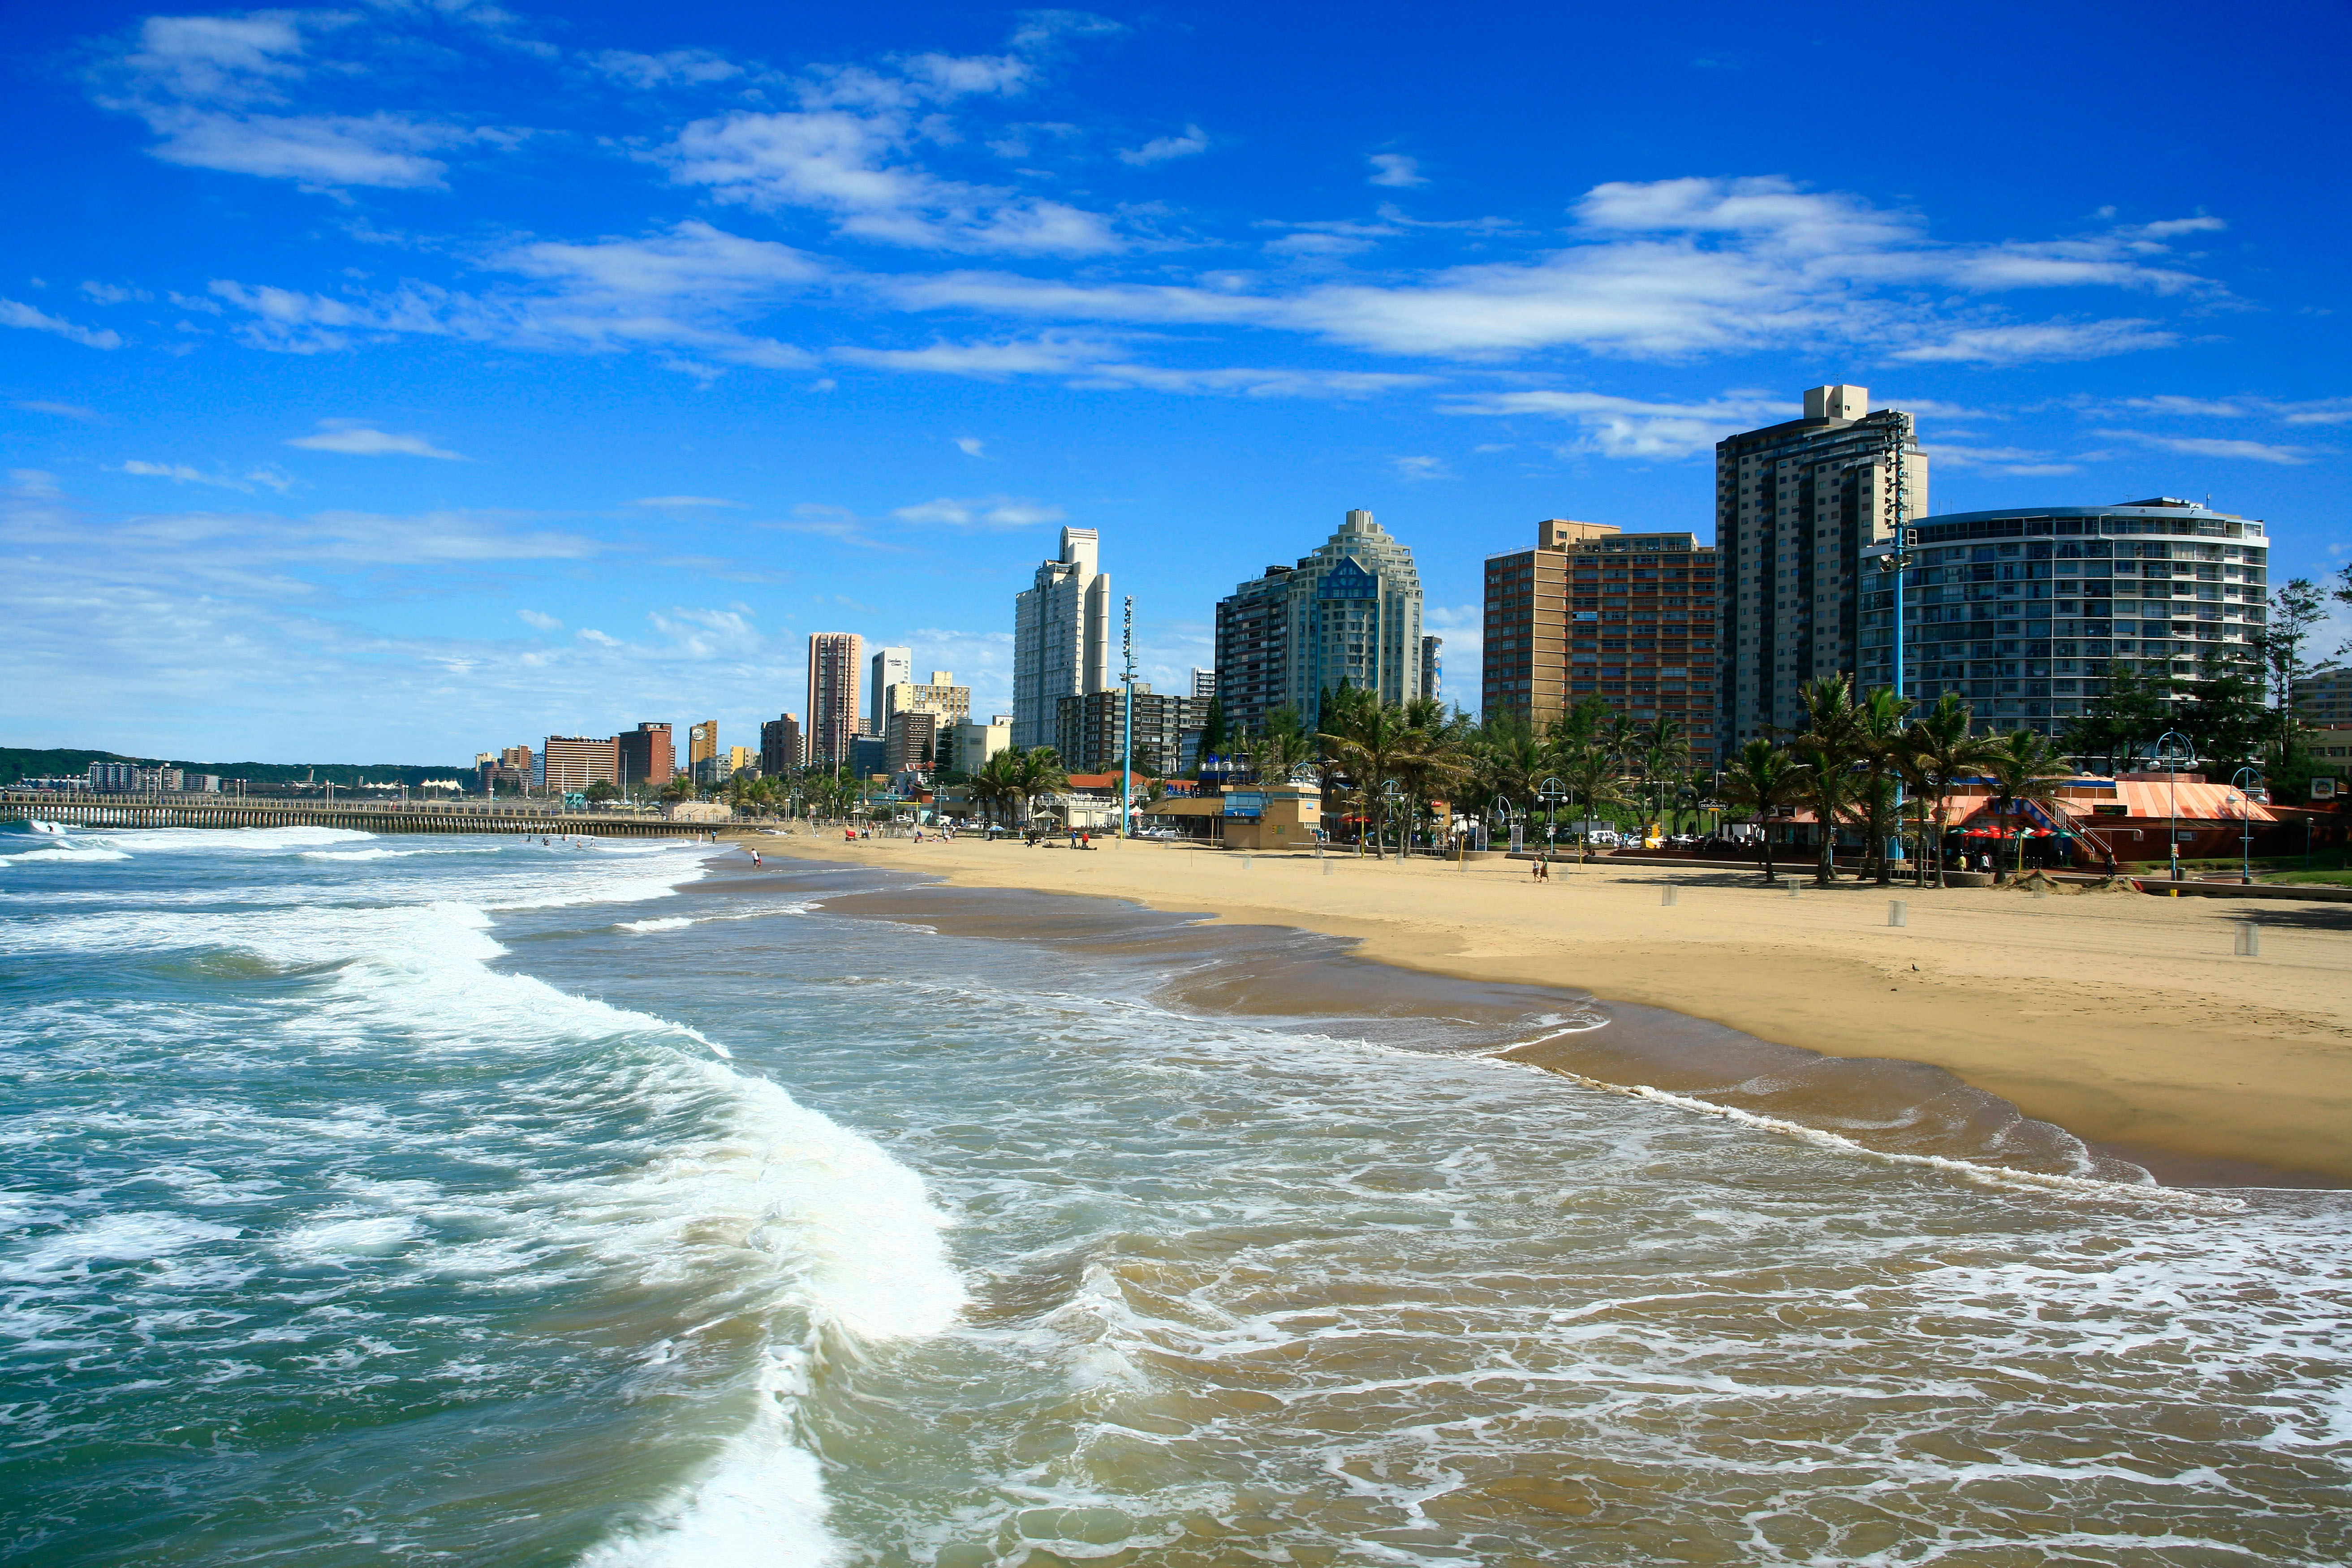 Durban, in the Kwazulu-Natal region,  is one of the pristine coastal areas marred by the assassination epidemic